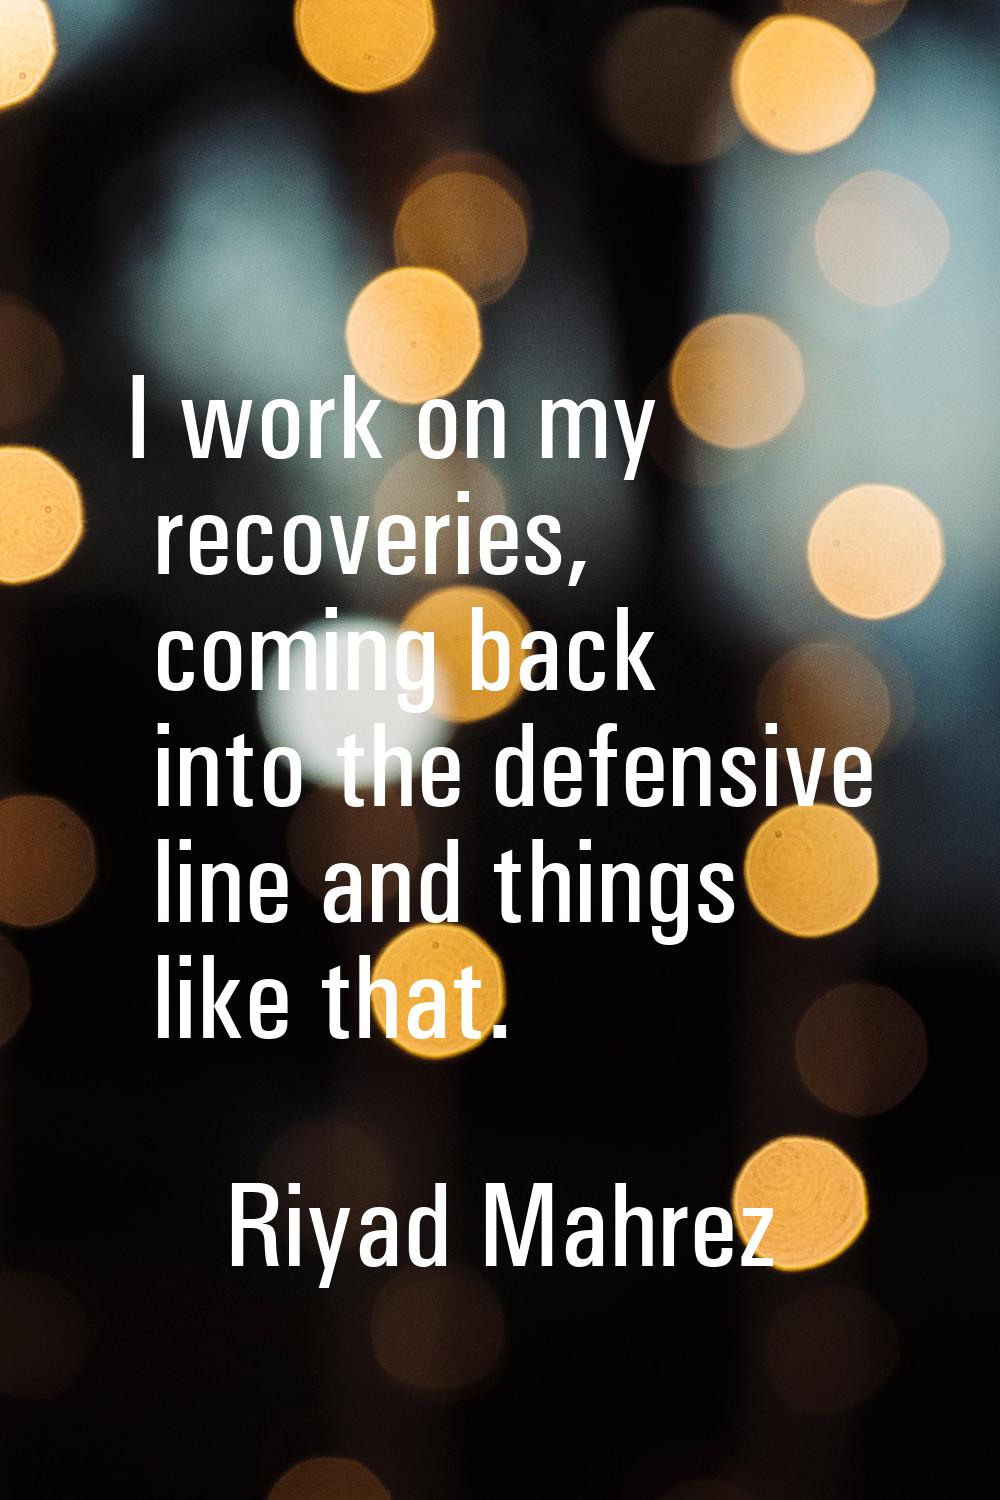 I work on my recoveries, coming back into the defensive line and things like that.